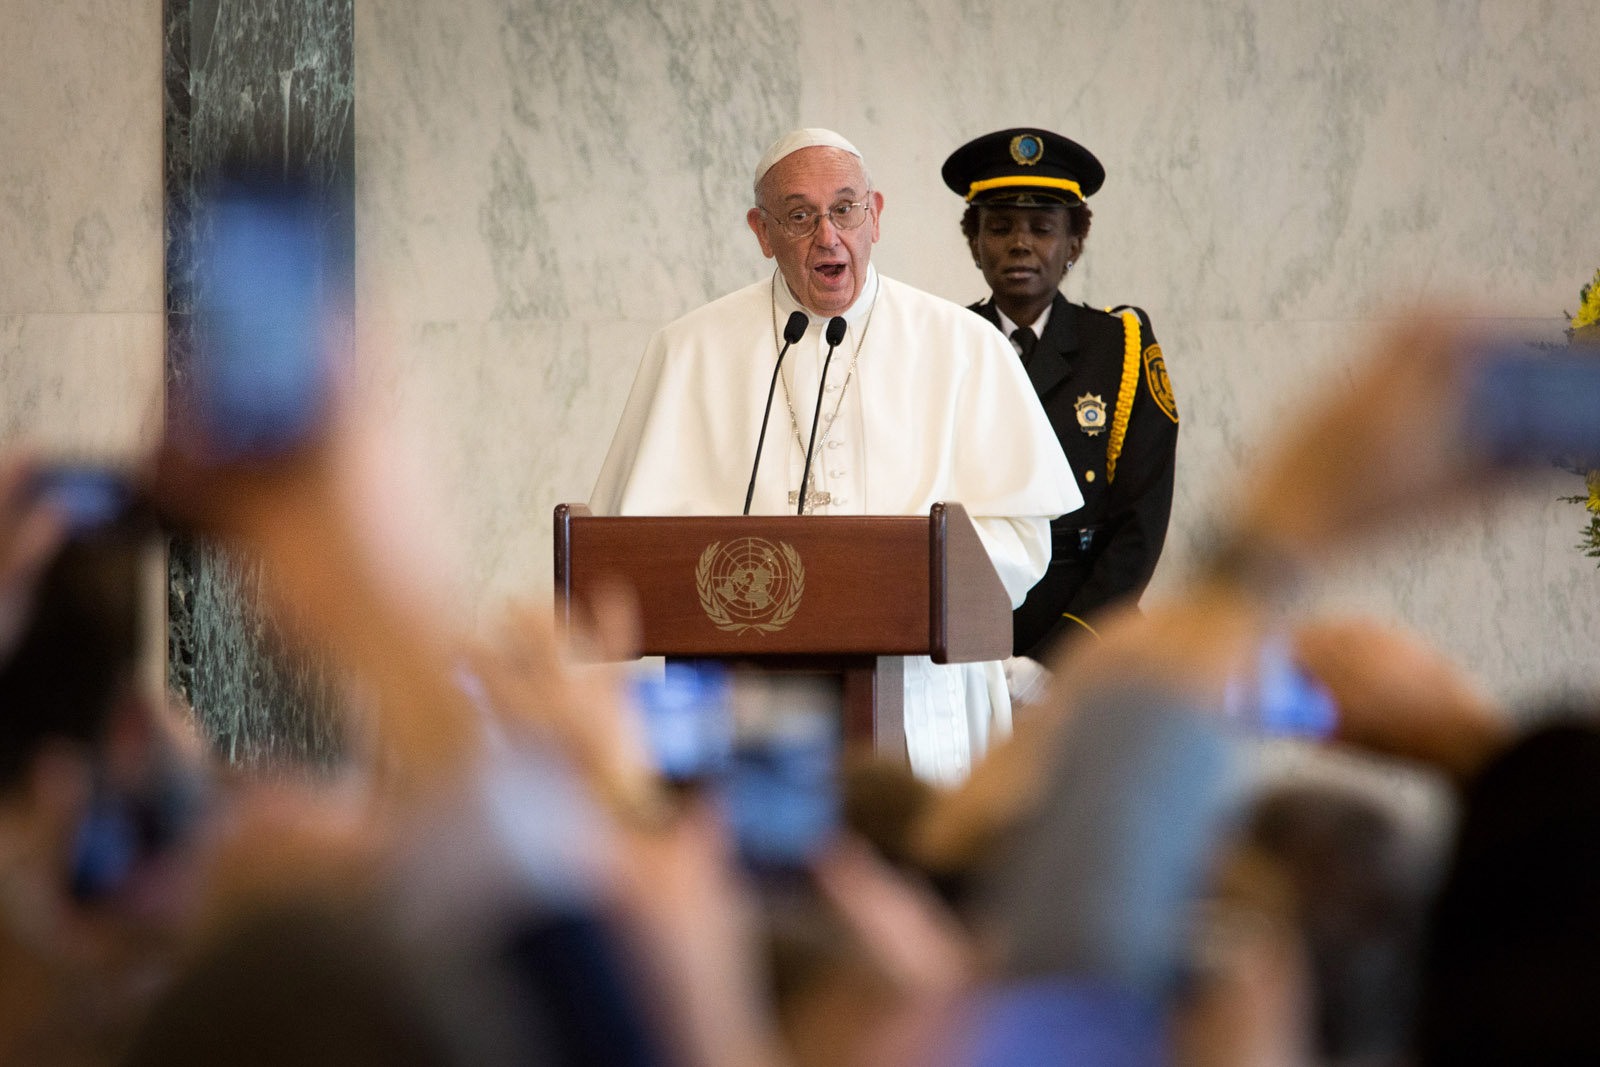 Pope Francis delivers remarks to UN staff members at United Nations headquarters Friday, Sept. 25, 2015. The Pope will address the UN General Assembly. (AP Photo/Kevin Hagen, Pool)